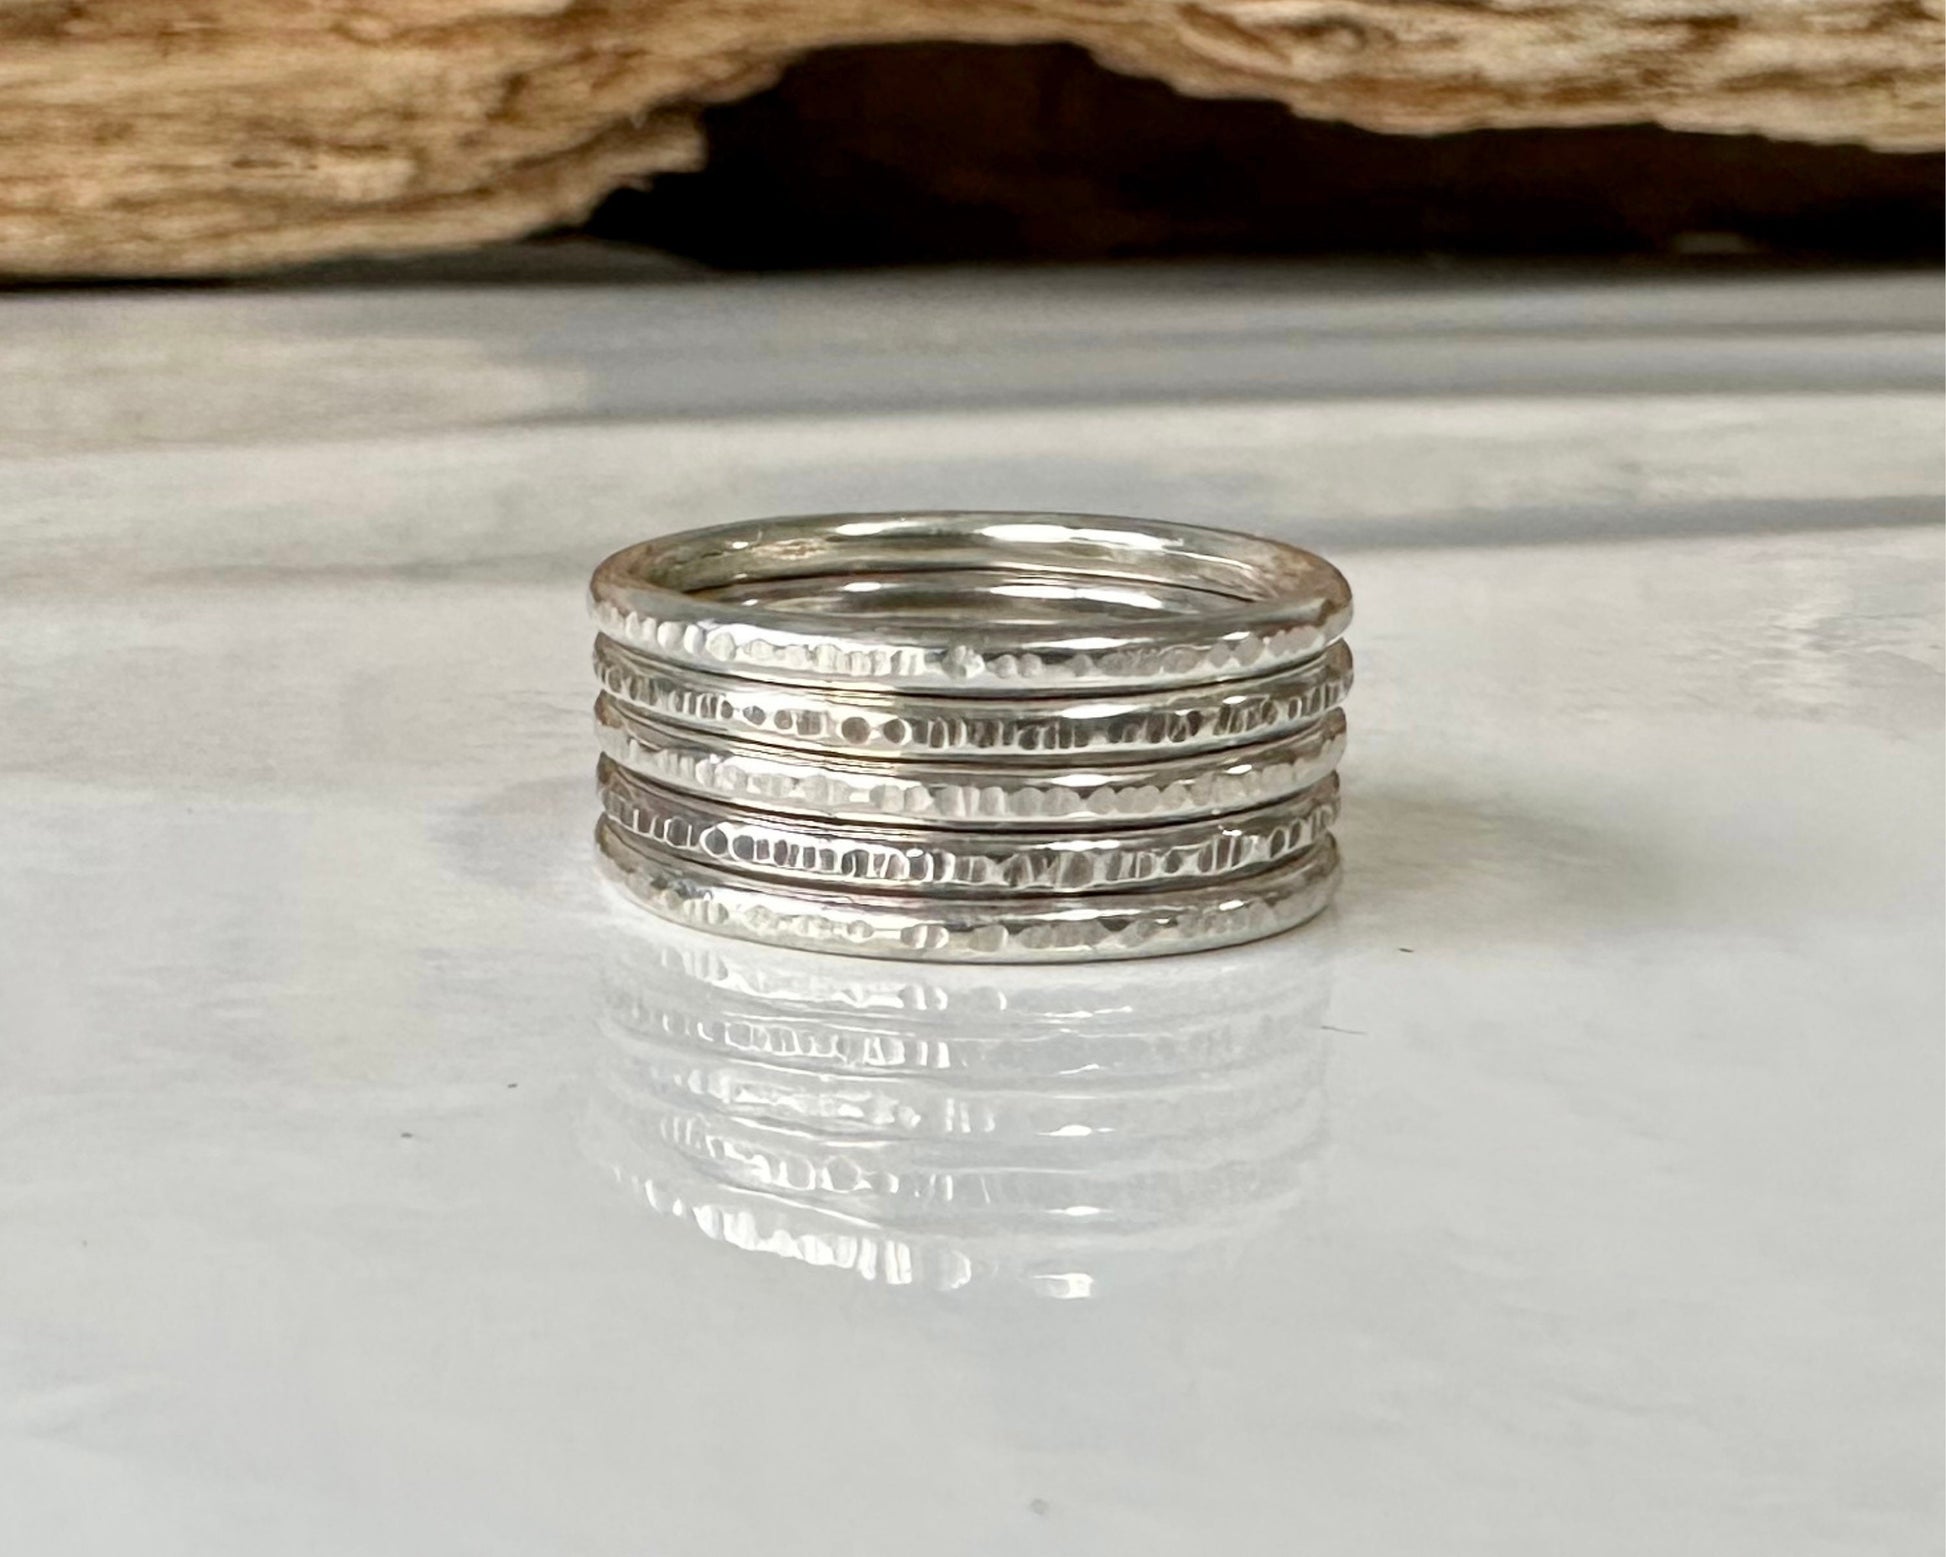 Set of three Shiny 1.8mm 925 Sterling Silver Stacking Rings, Ripple Hammered Effect Minimalist Ring Band, Handmade Stacking Ring